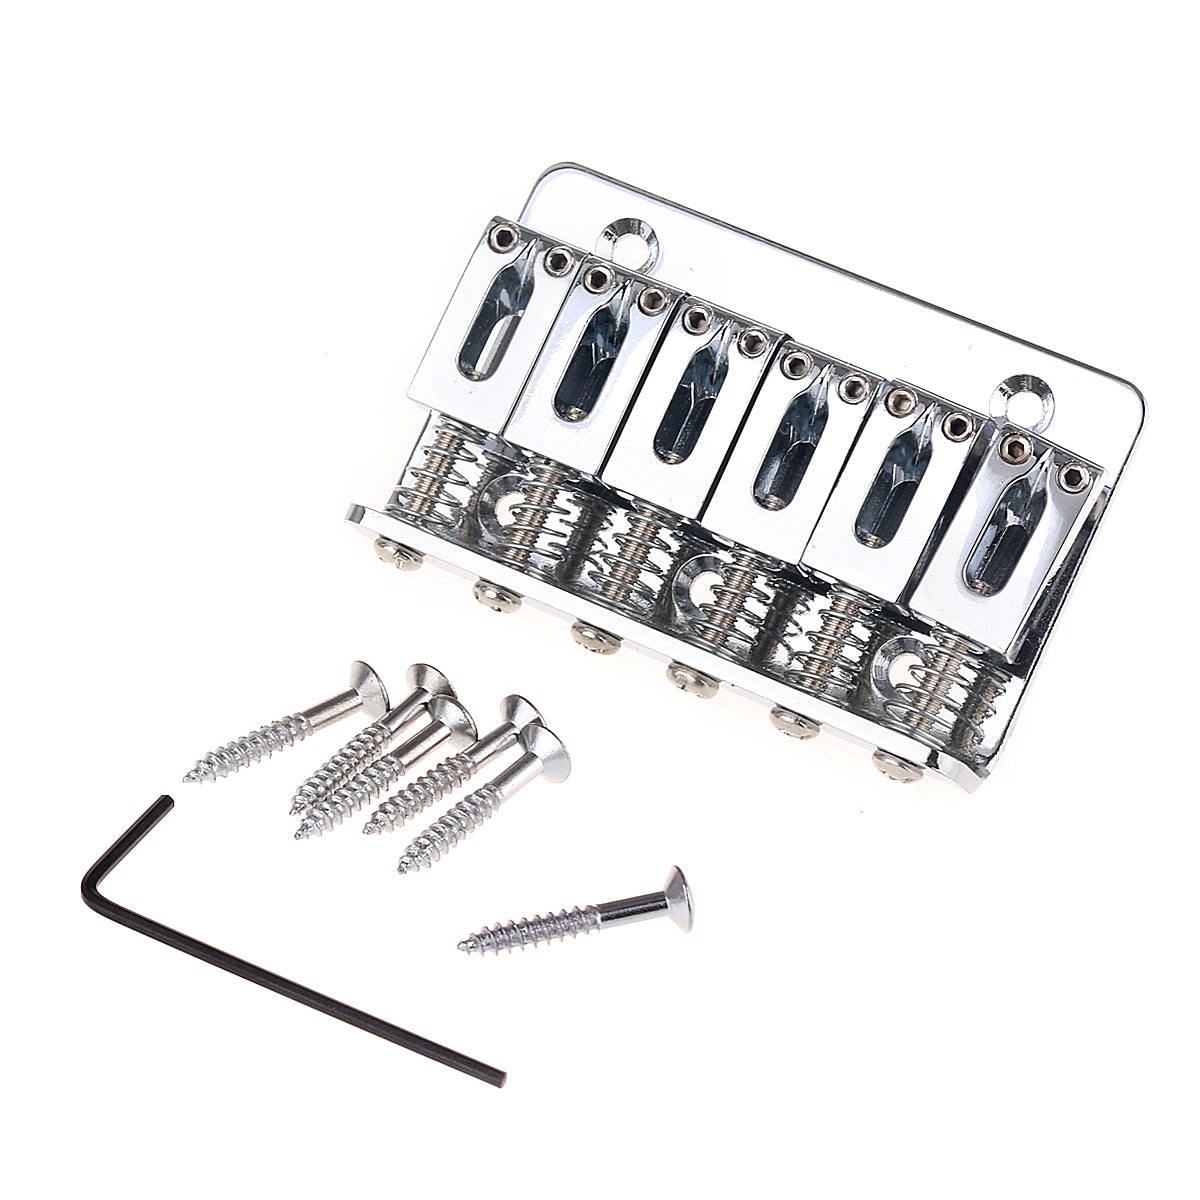 Musiclily 65mm 6 String Fixed Electric Guitar Hardtail Bridge,Chrome